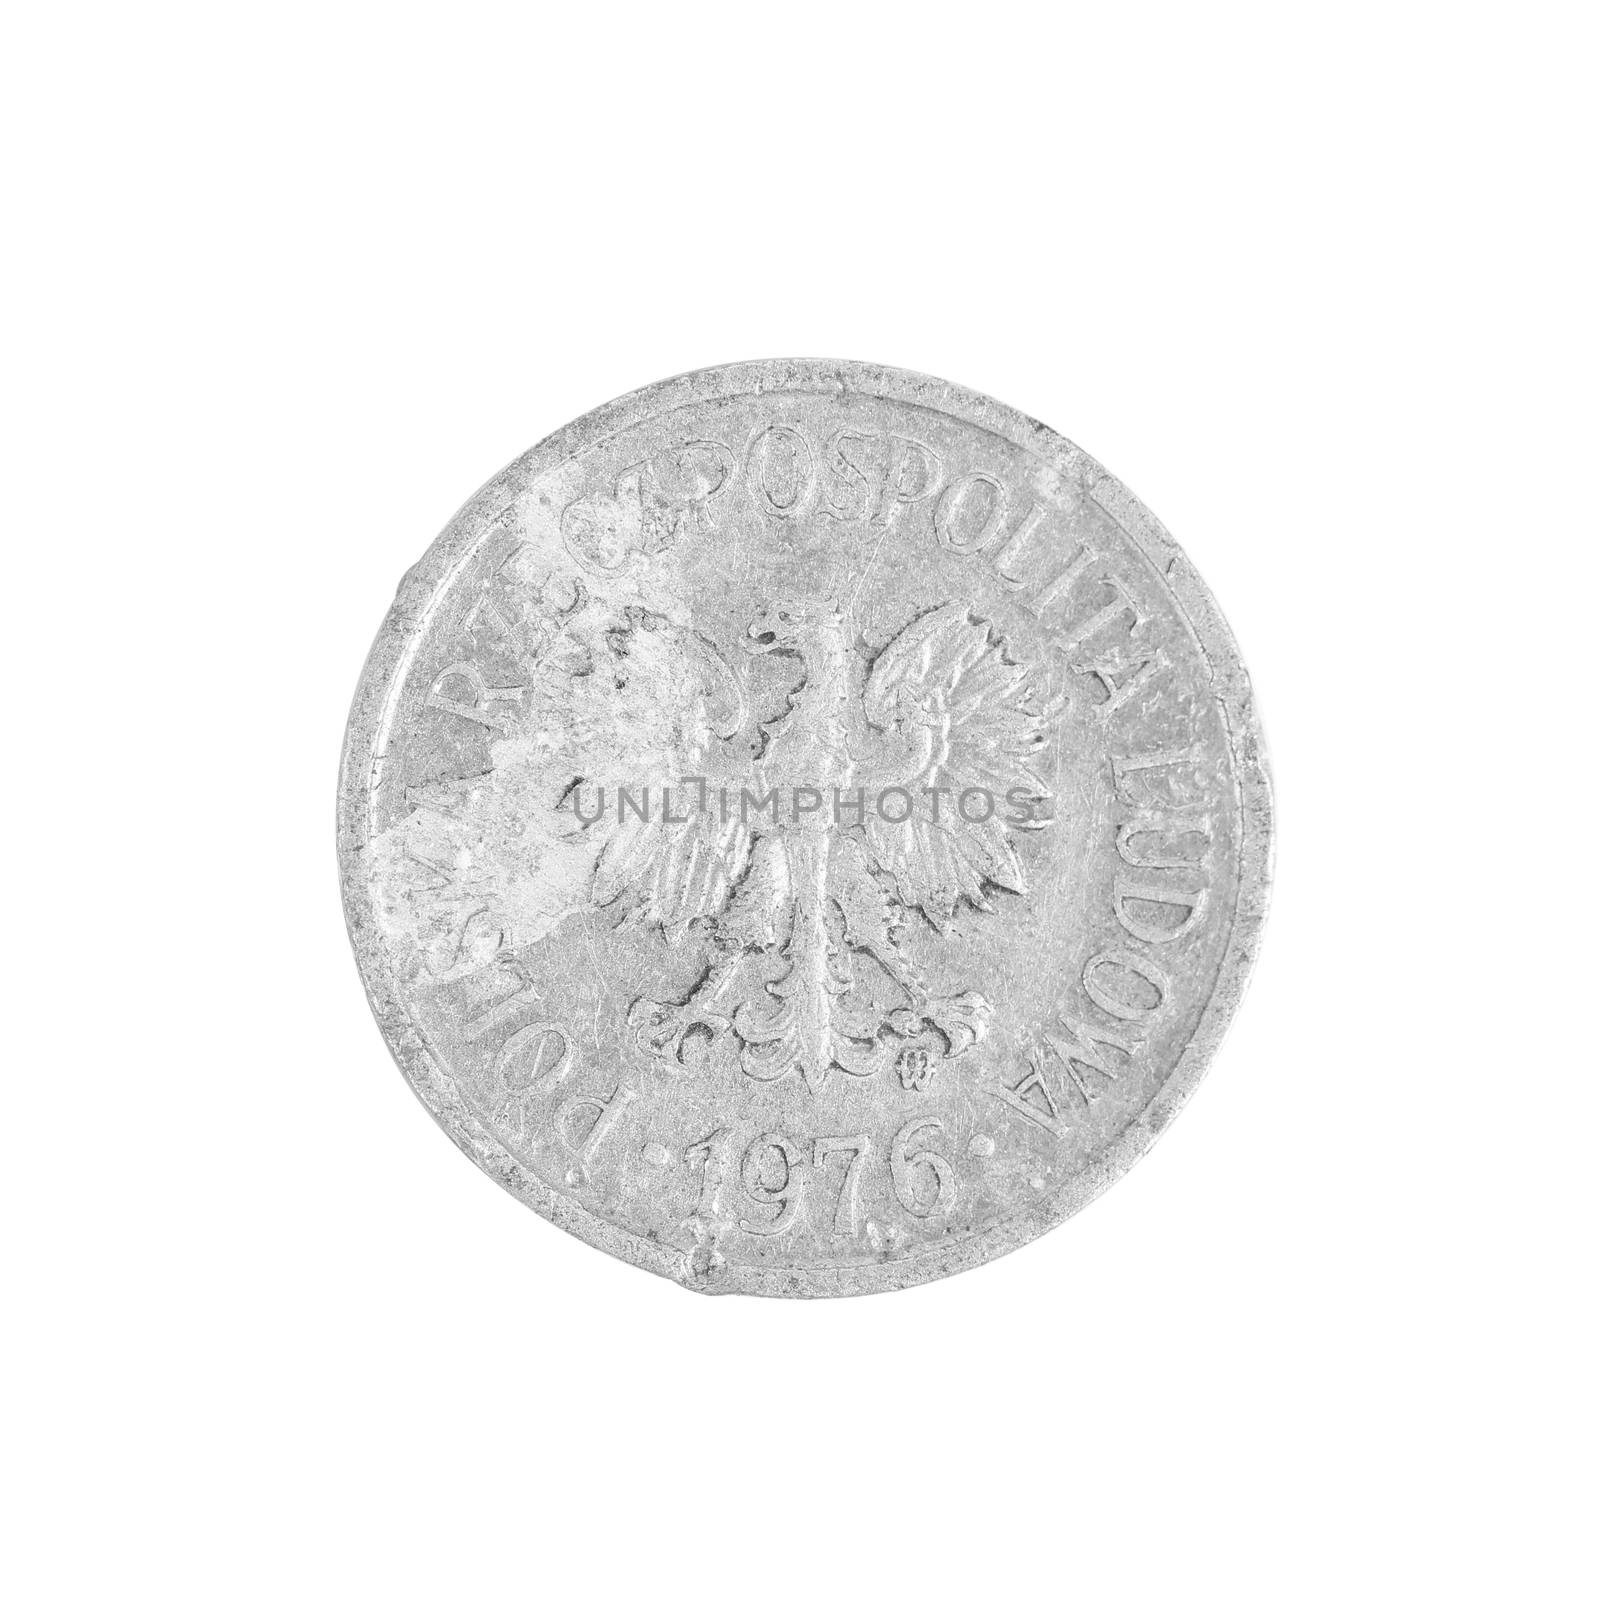 Polish coin close up. Isolated on a white background.